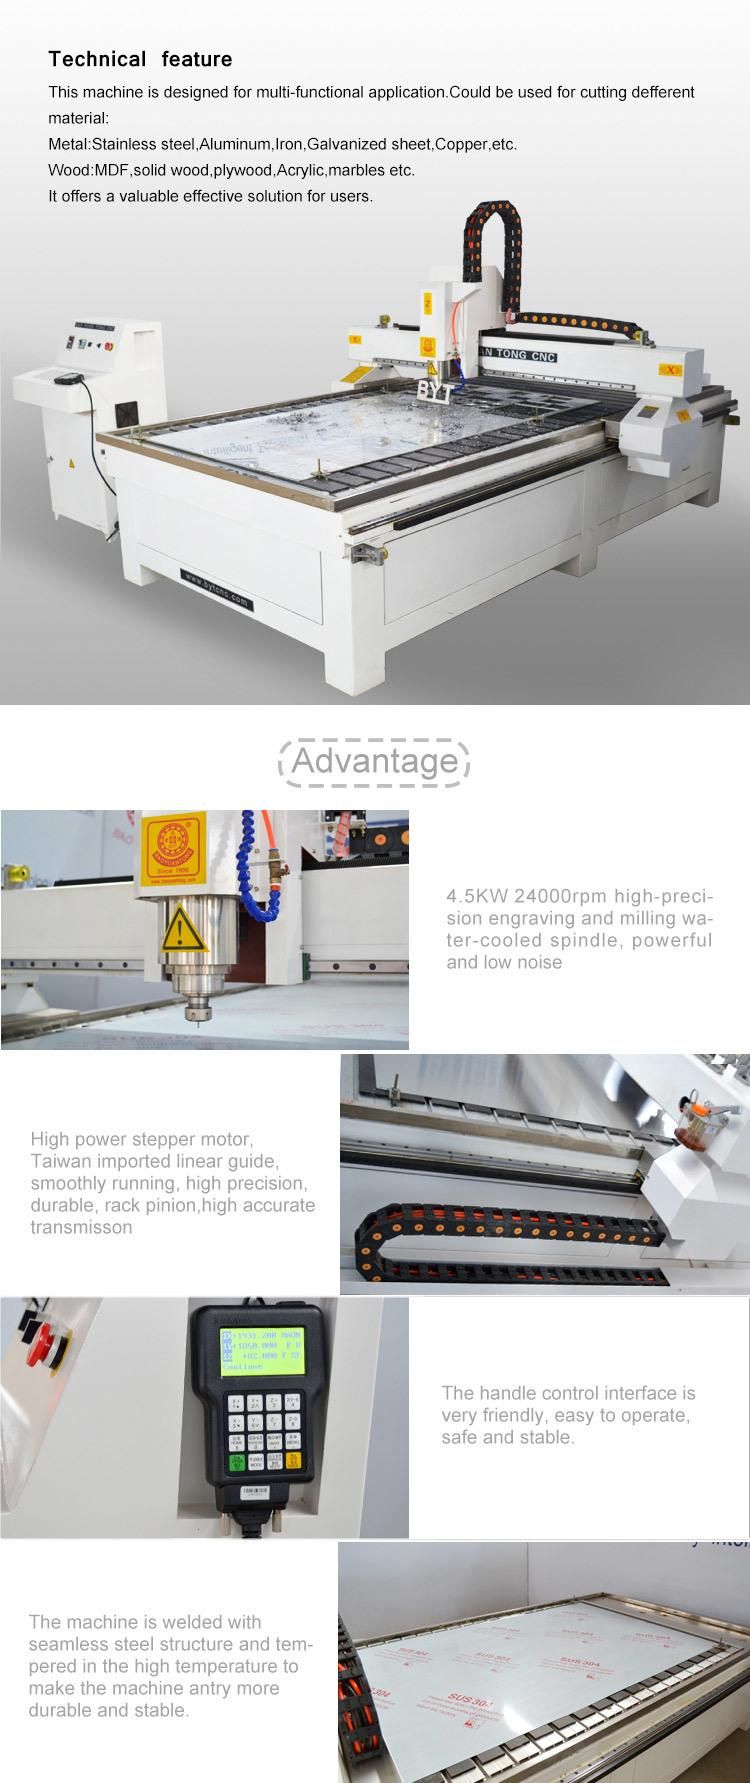 1325 Multifunction Metal and Non Metal Cutting CNC Router